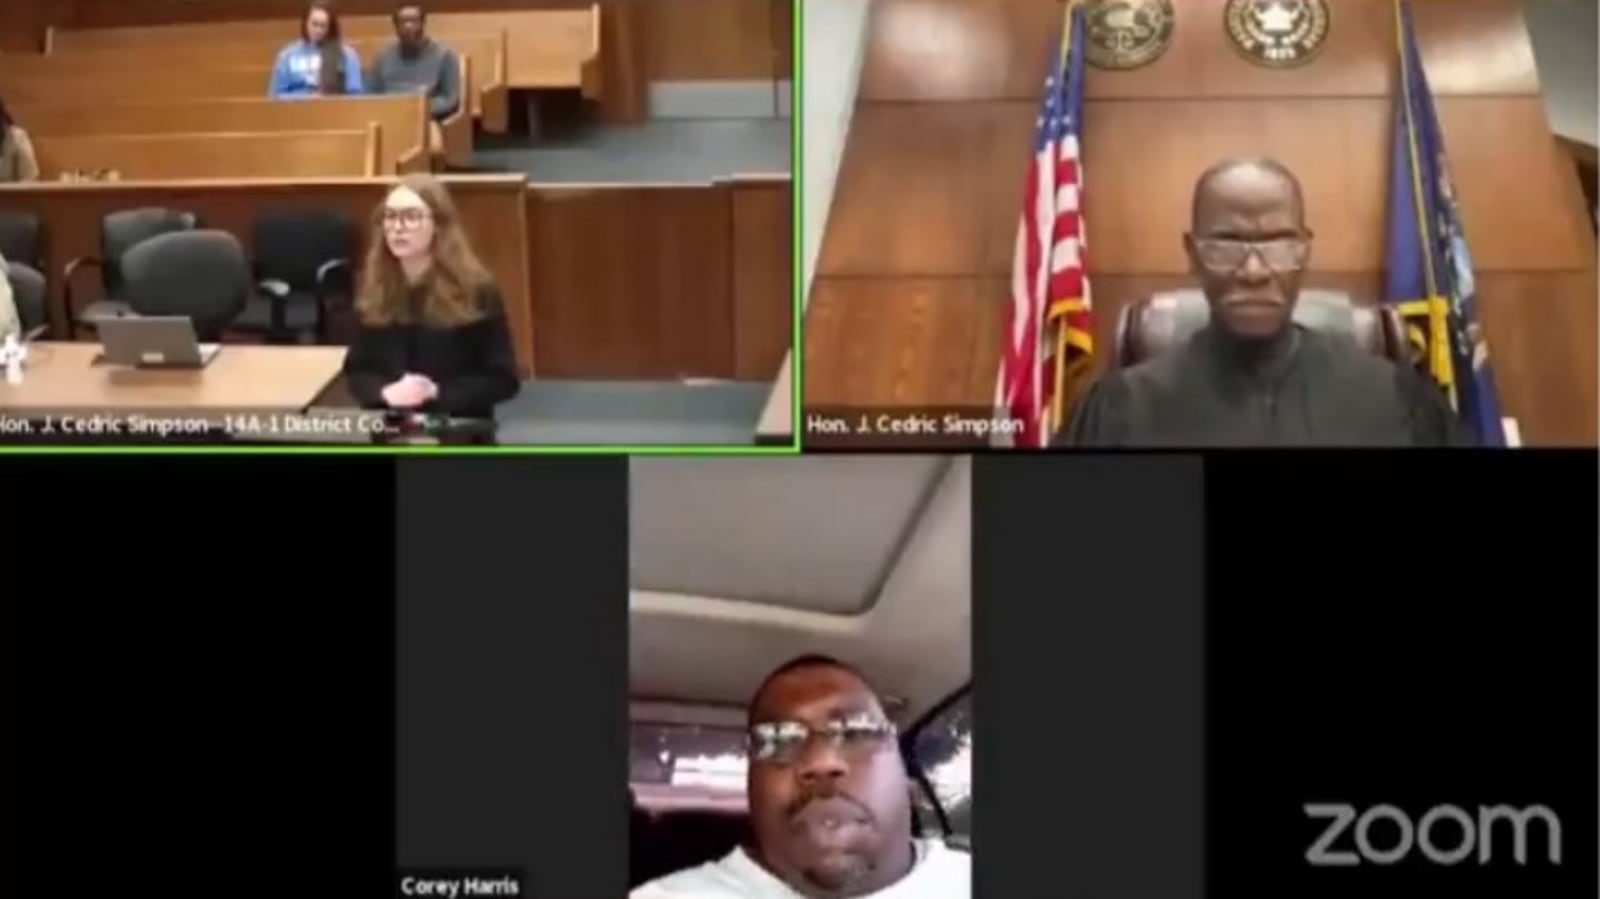 Michigan man's arrest in viral courtroom Zoom fail revealed as a clerical error: Update